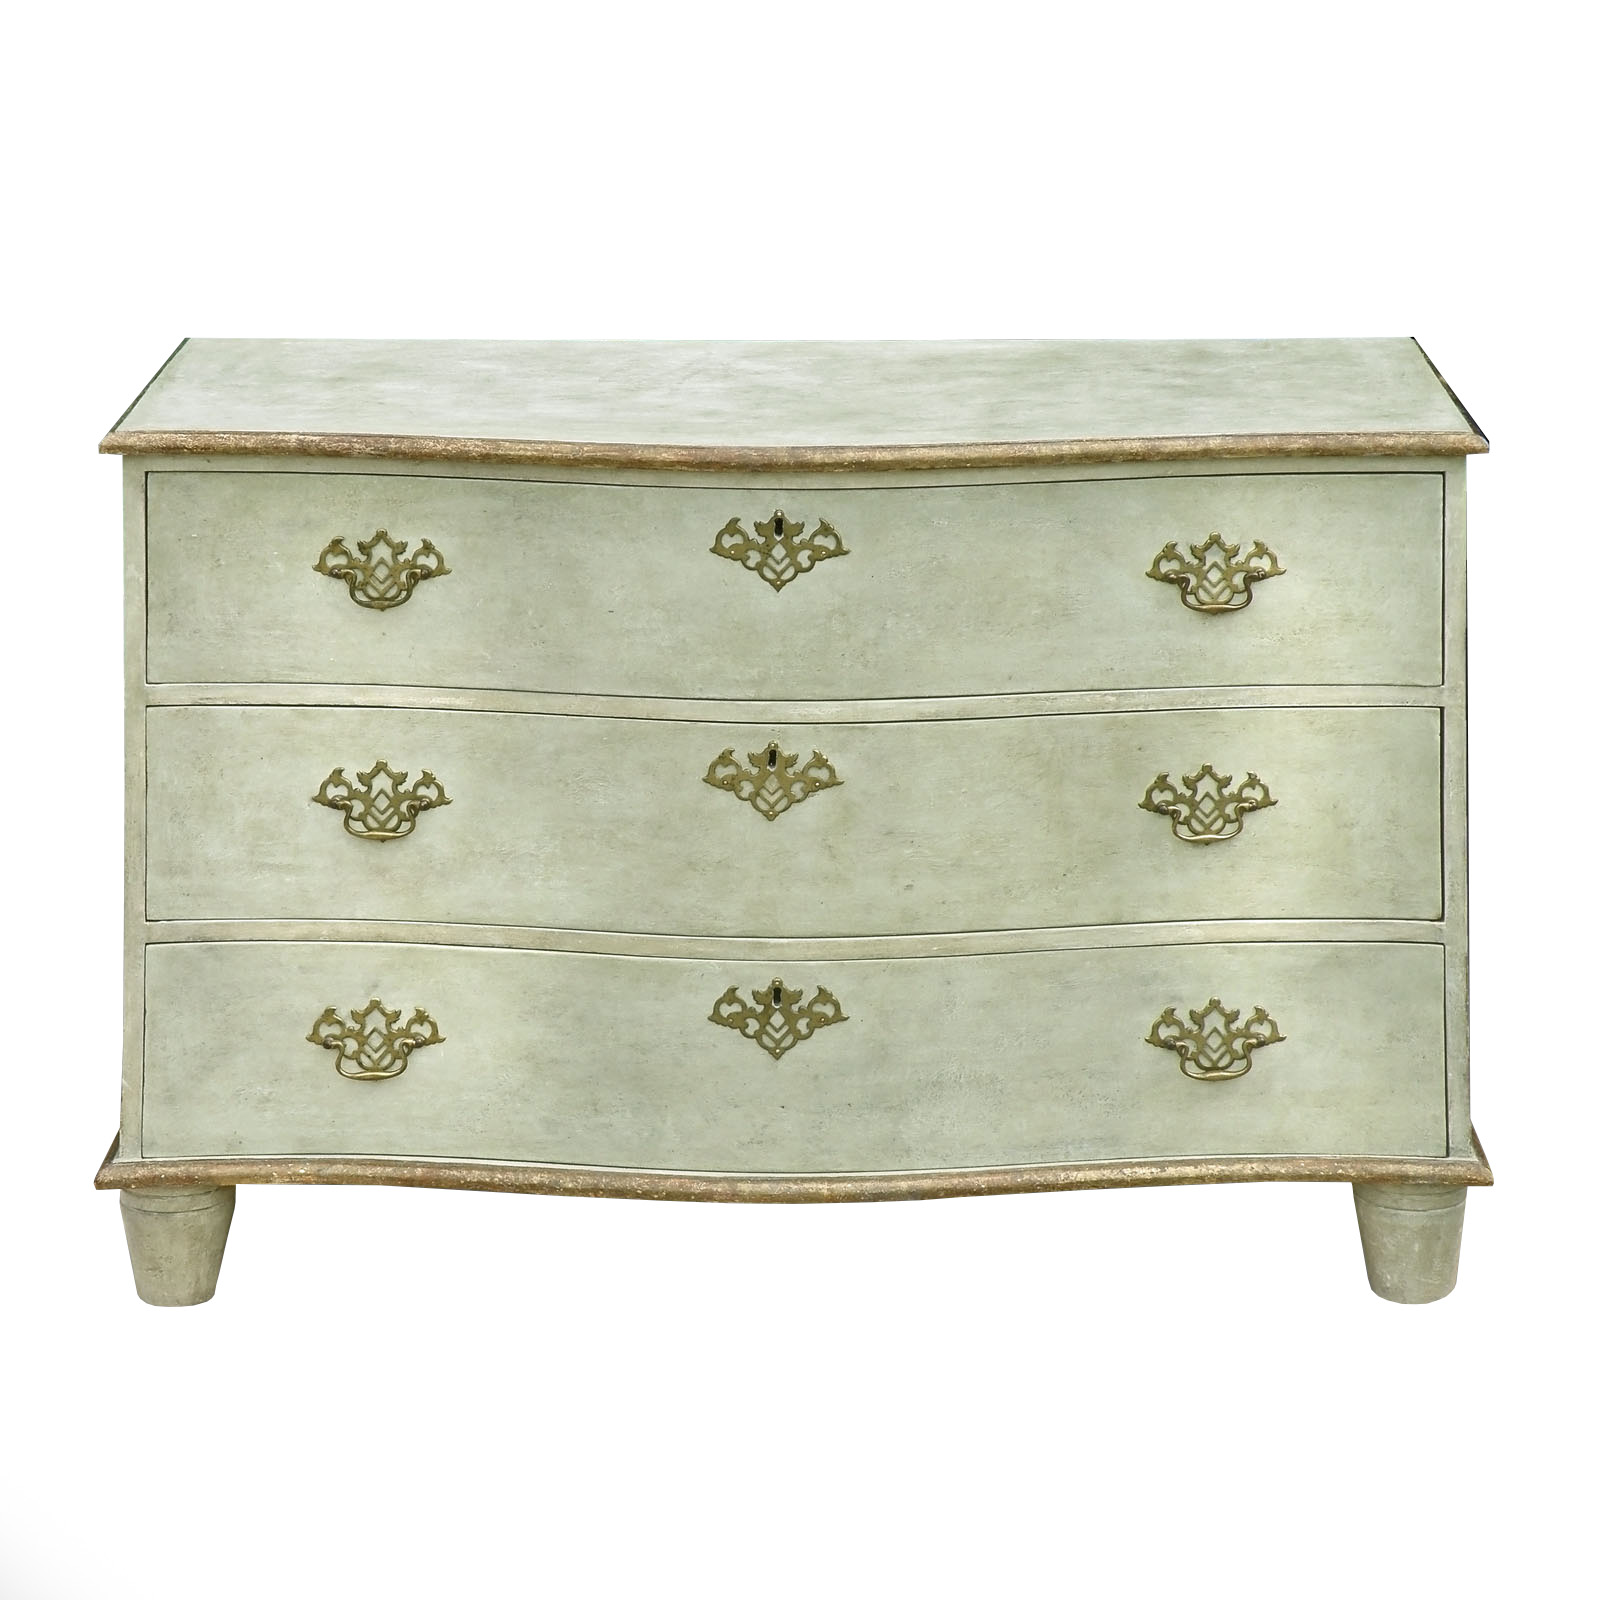 Serpentine Parcel Gilt Chest of Drawers. Made to order by Perceval Designs